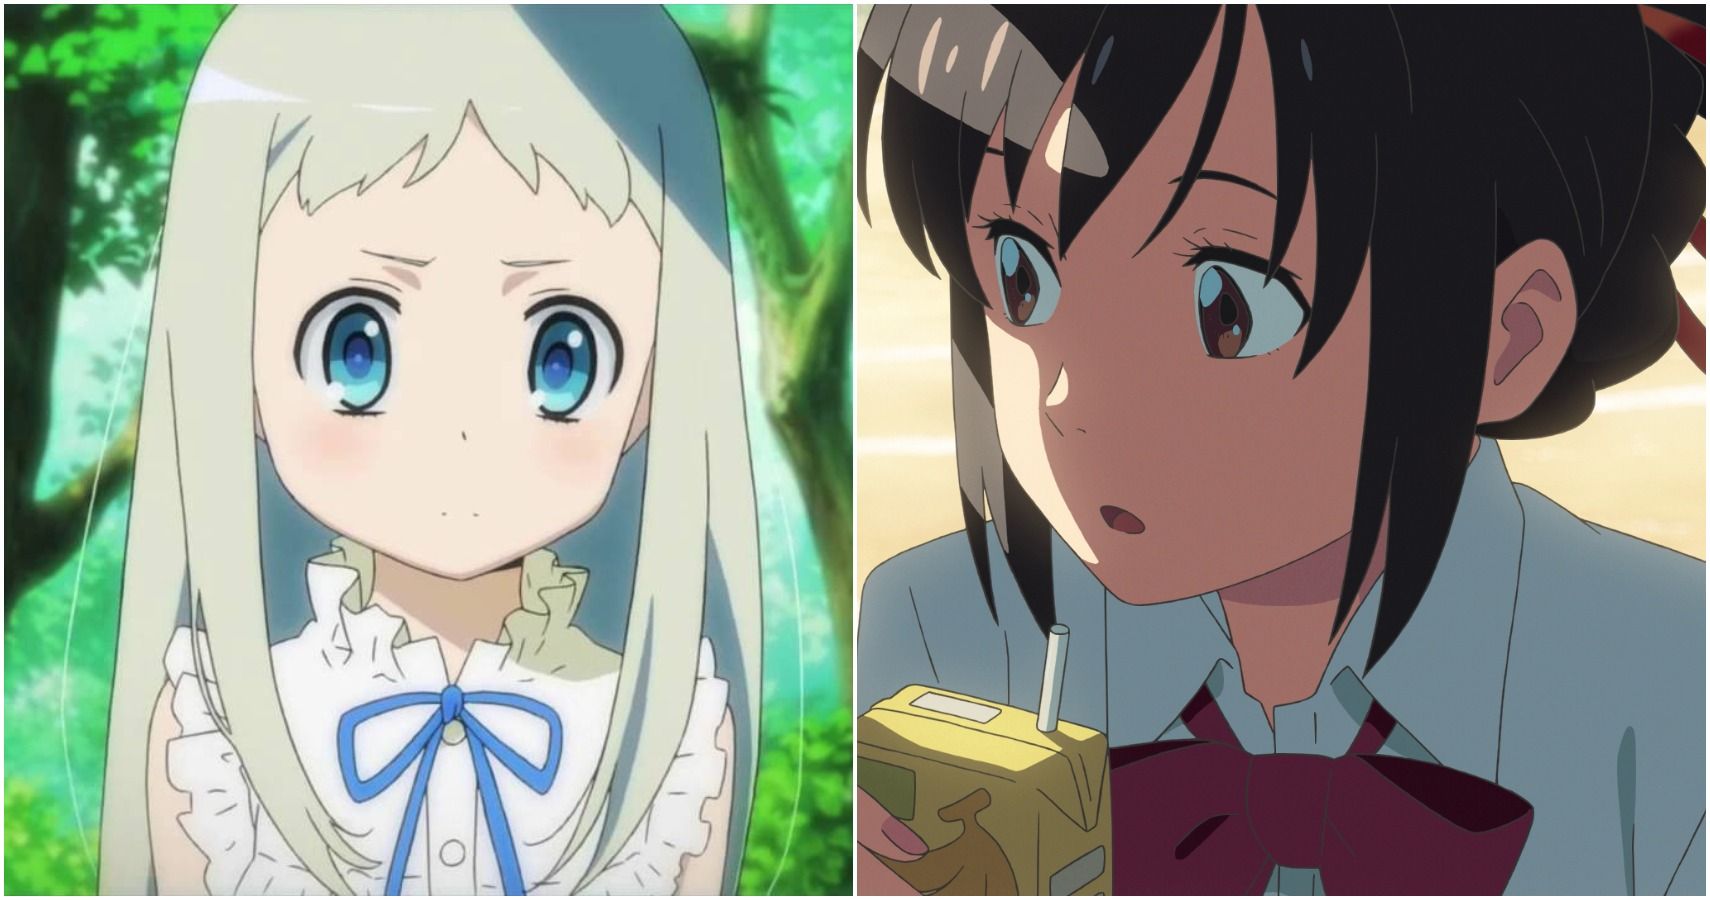 15 Anime To Watch If You Like Your Name CBR